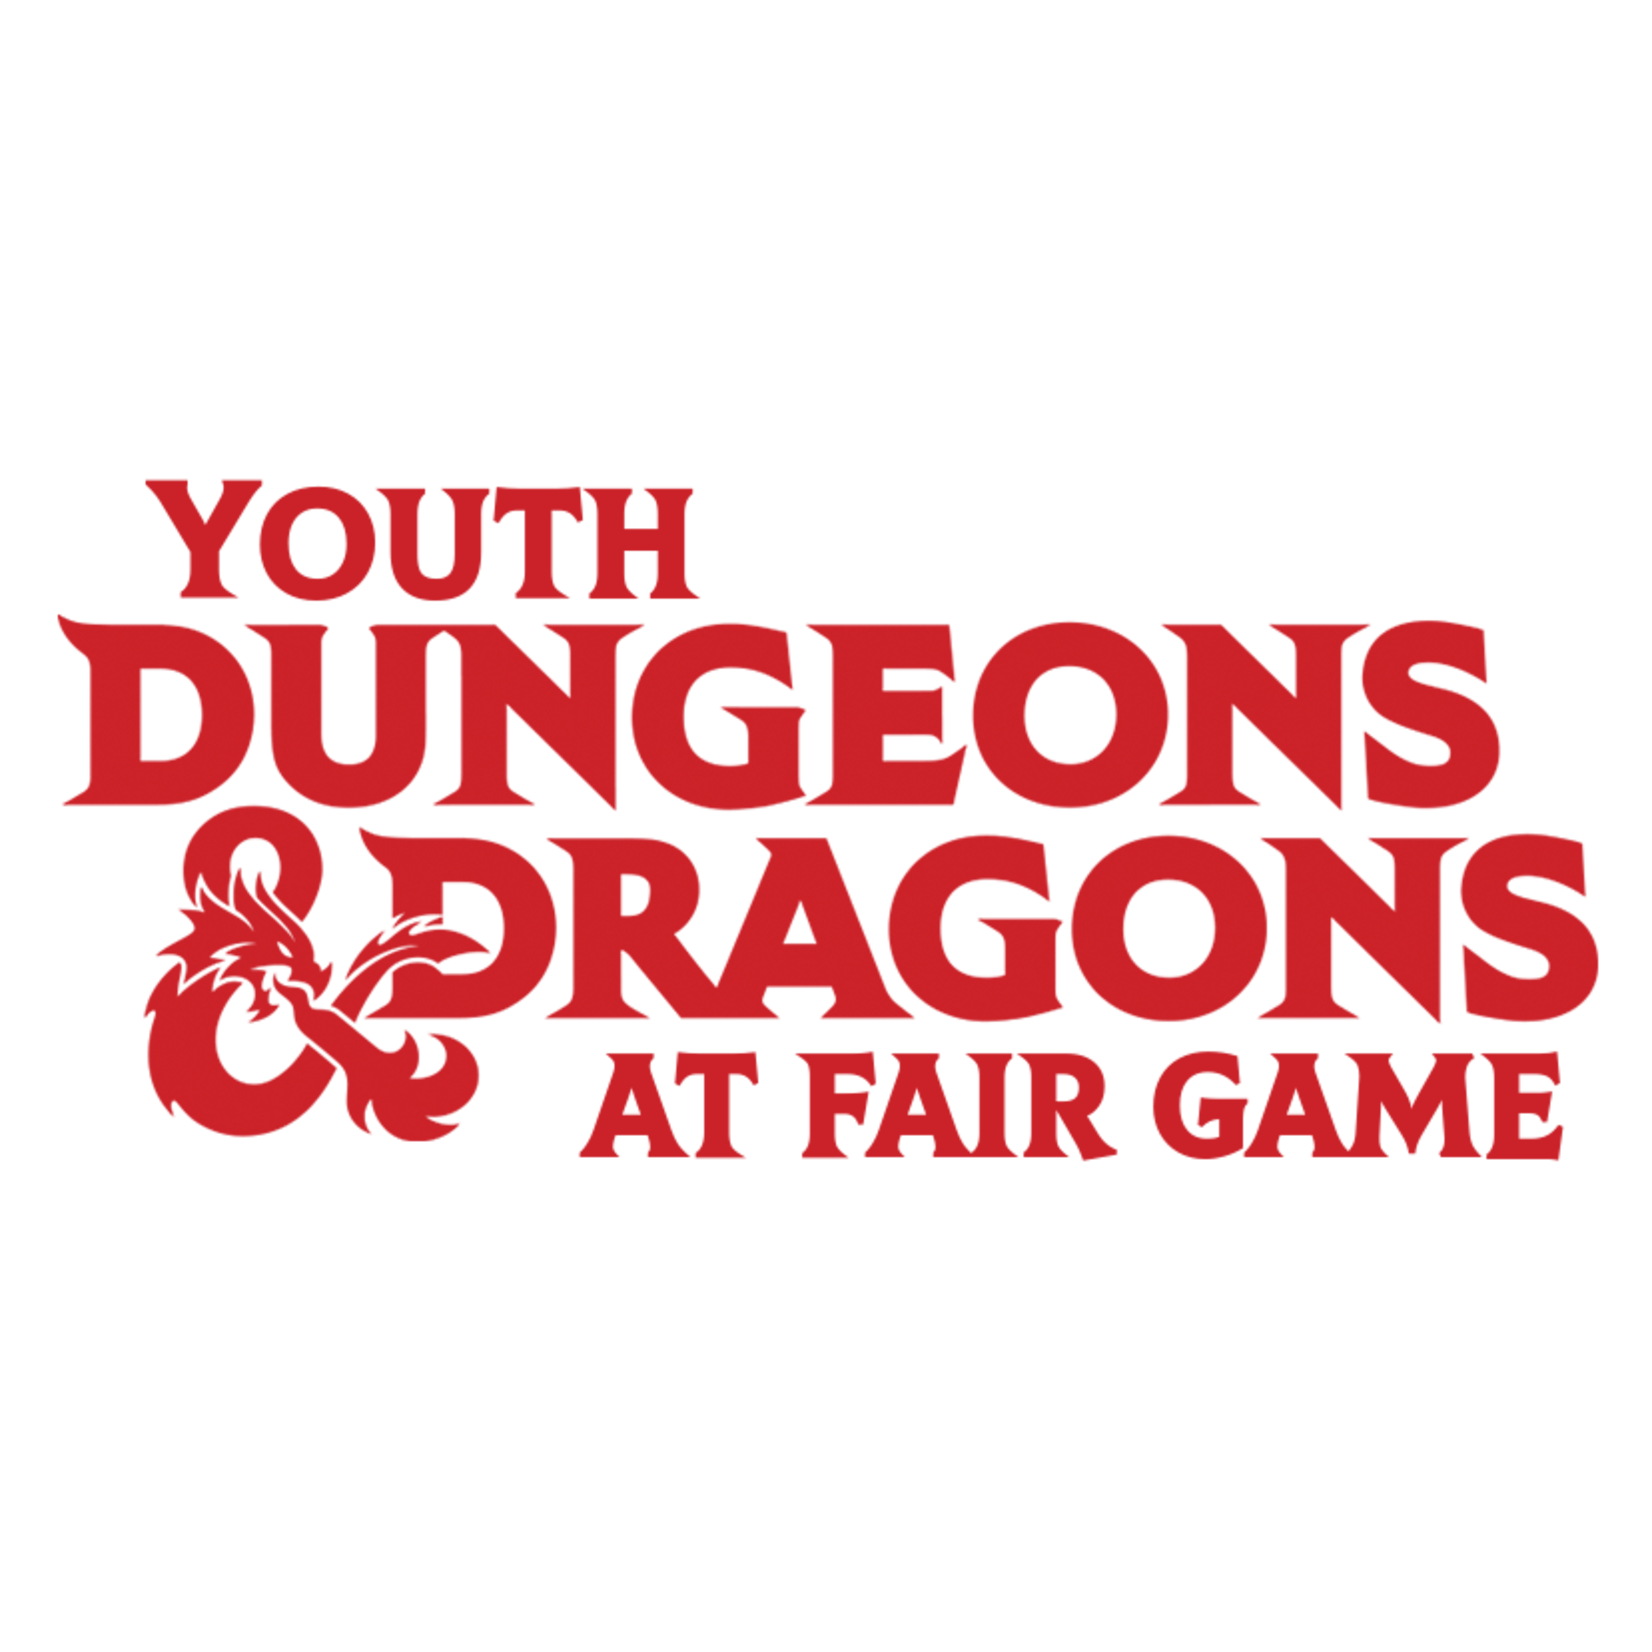 Fair Game YDND: Tuesday, July 26 - Downers Grove 4-6 PM (Ages 8-13)